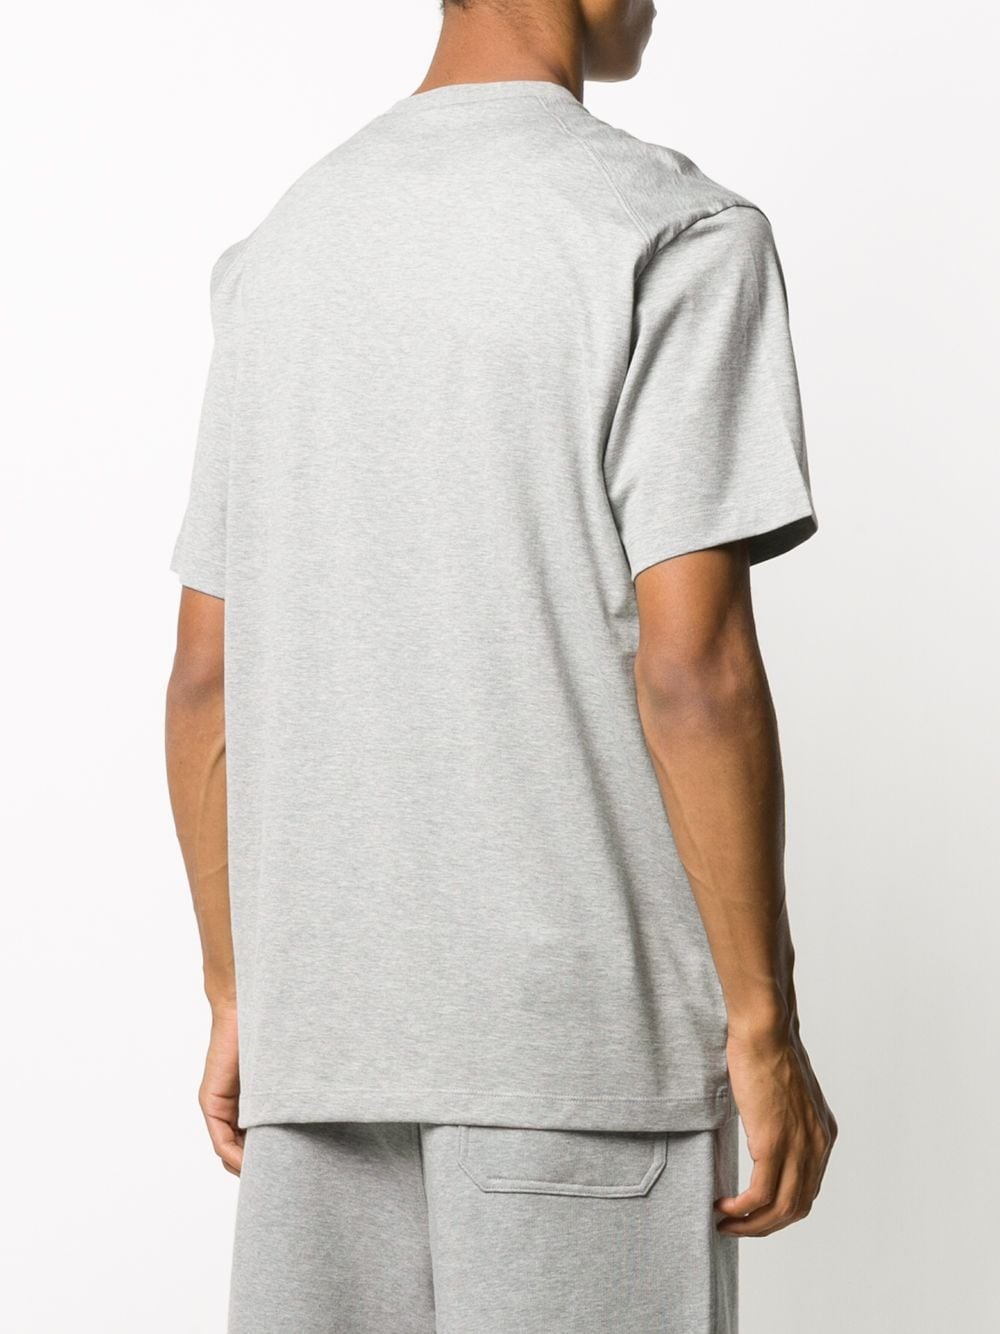 y-3 T-SHIRT available on montiboutique.com - 35878